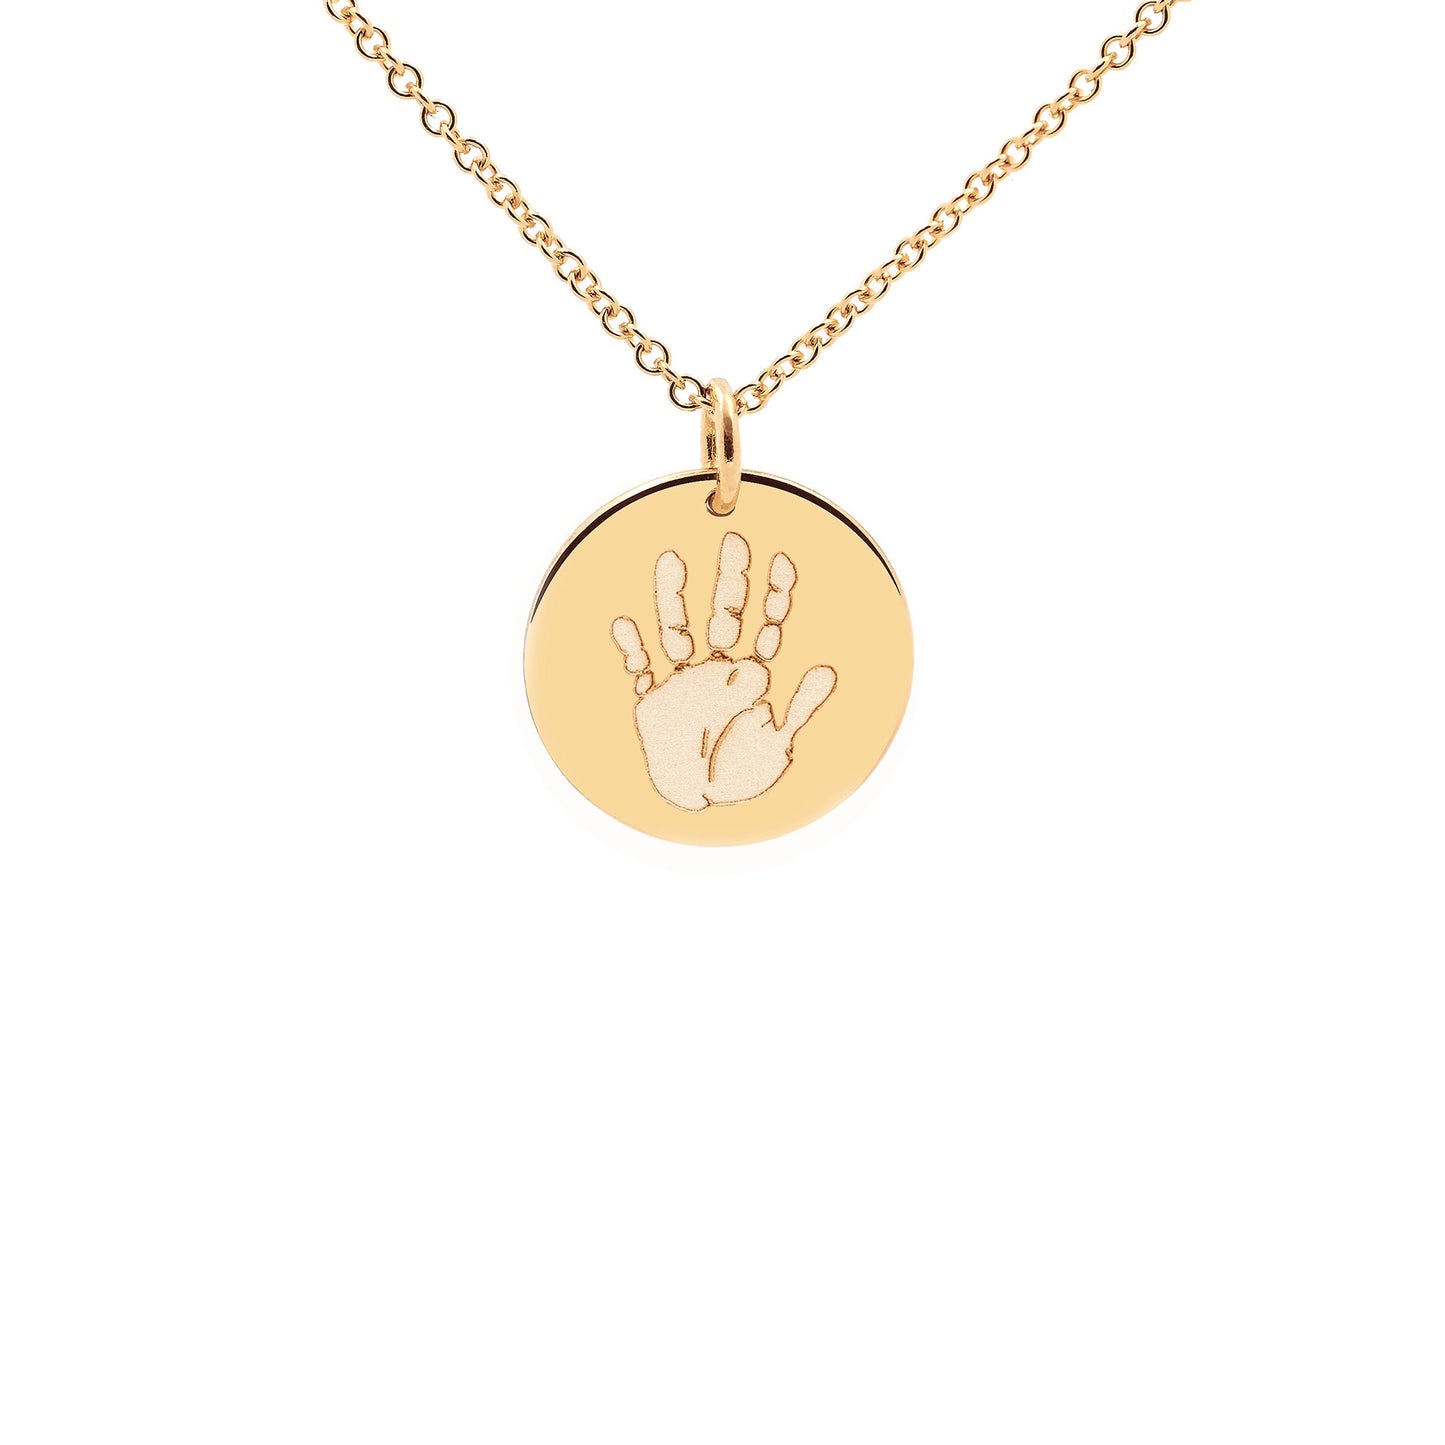 Handprint / Footprint Cable Chain Necklace in 14K Gold